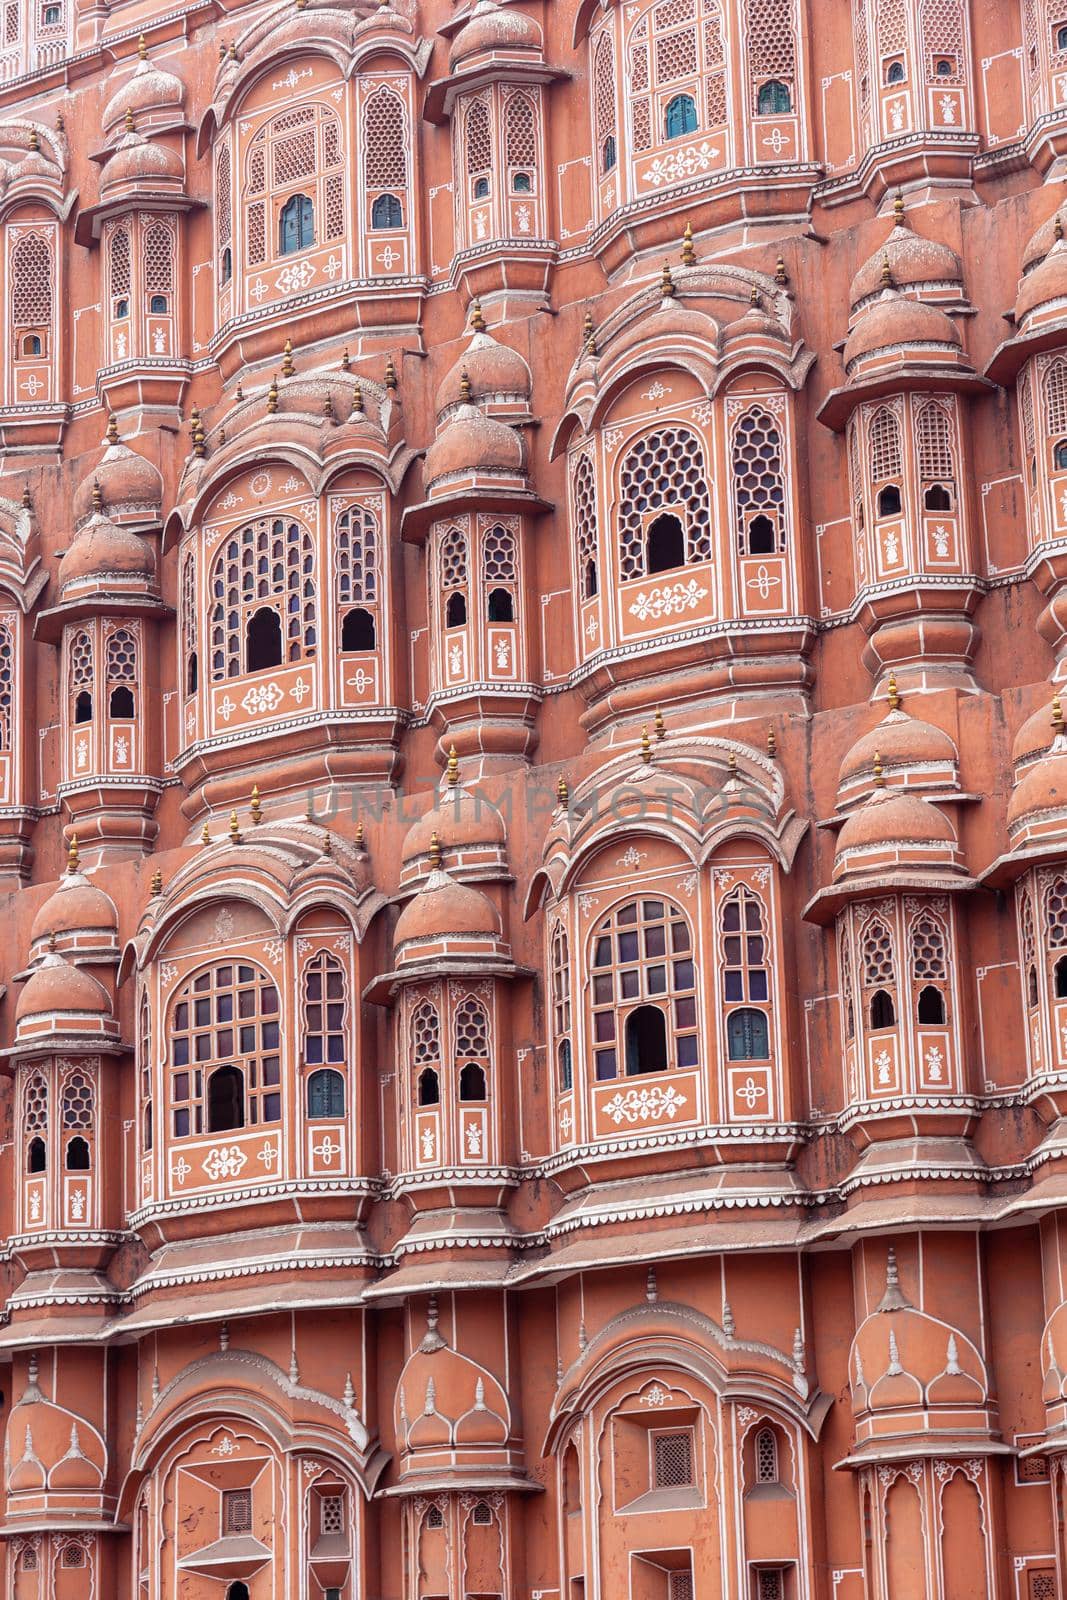 Jaipur, India - December 11, 2019: Beautiful windows of the Hawa Mahal, Palace of Winds in the pink city.